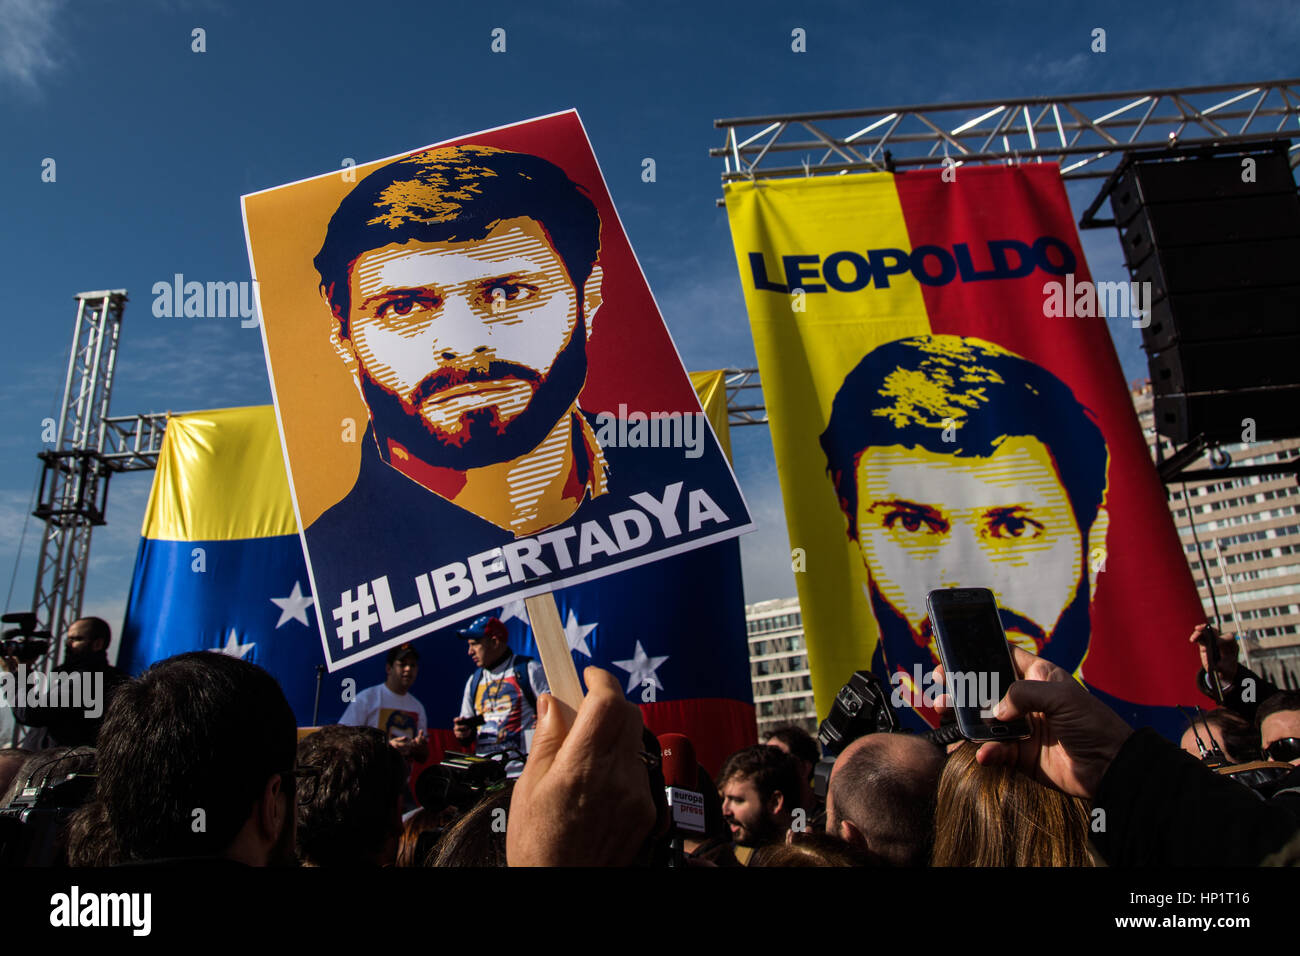 Madrid, Spain. 18th Feb, 2017. People protesting demanding the release of Leopoldo Lopez and political prisoners Credit: Marcos del Mazo/Alamy Live News Stock Photo